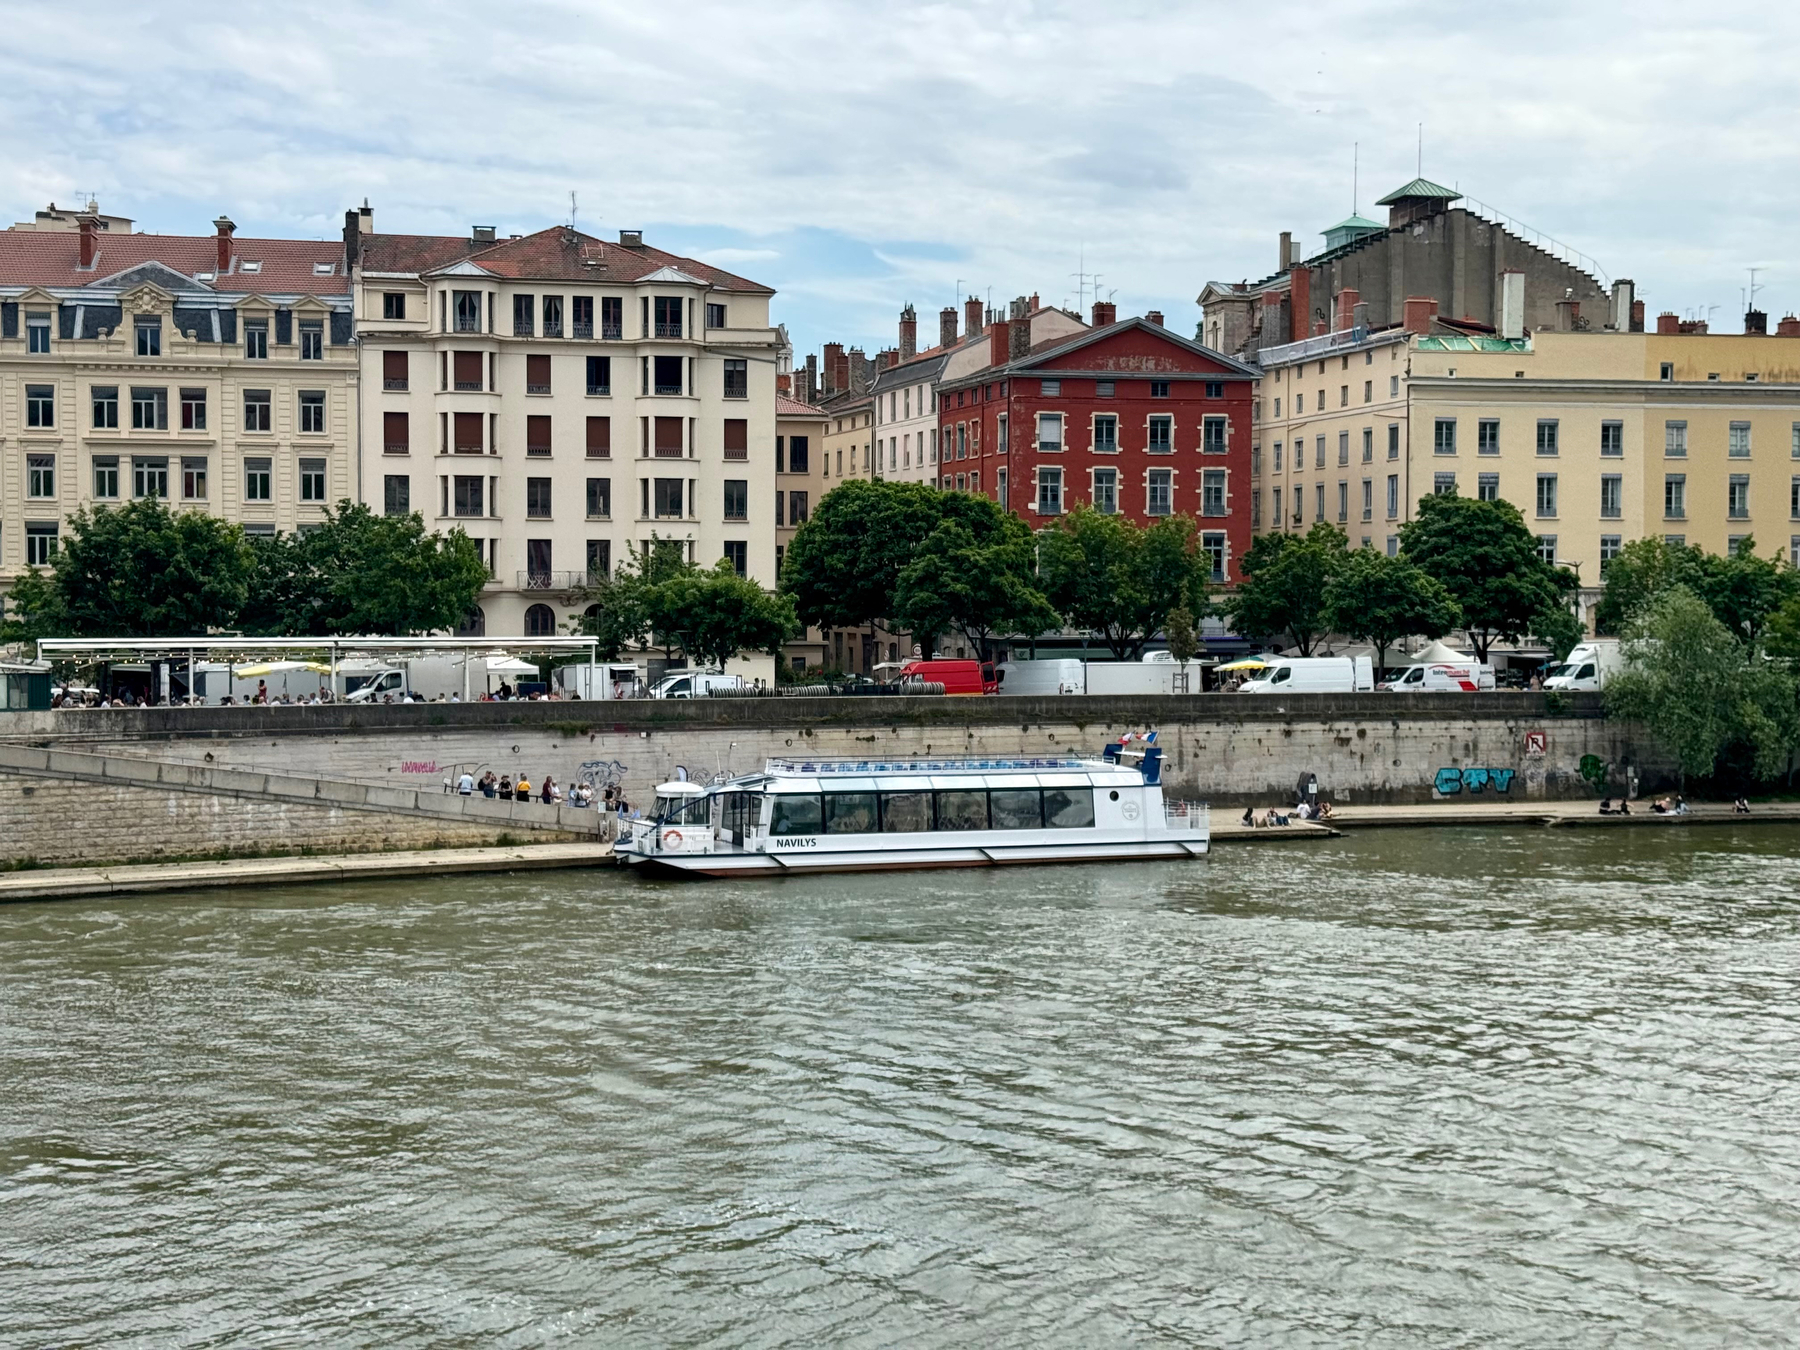 A river with a tour boat, people sitting on the quay, and a backdrop of European-style buildings under a cloudy sky.